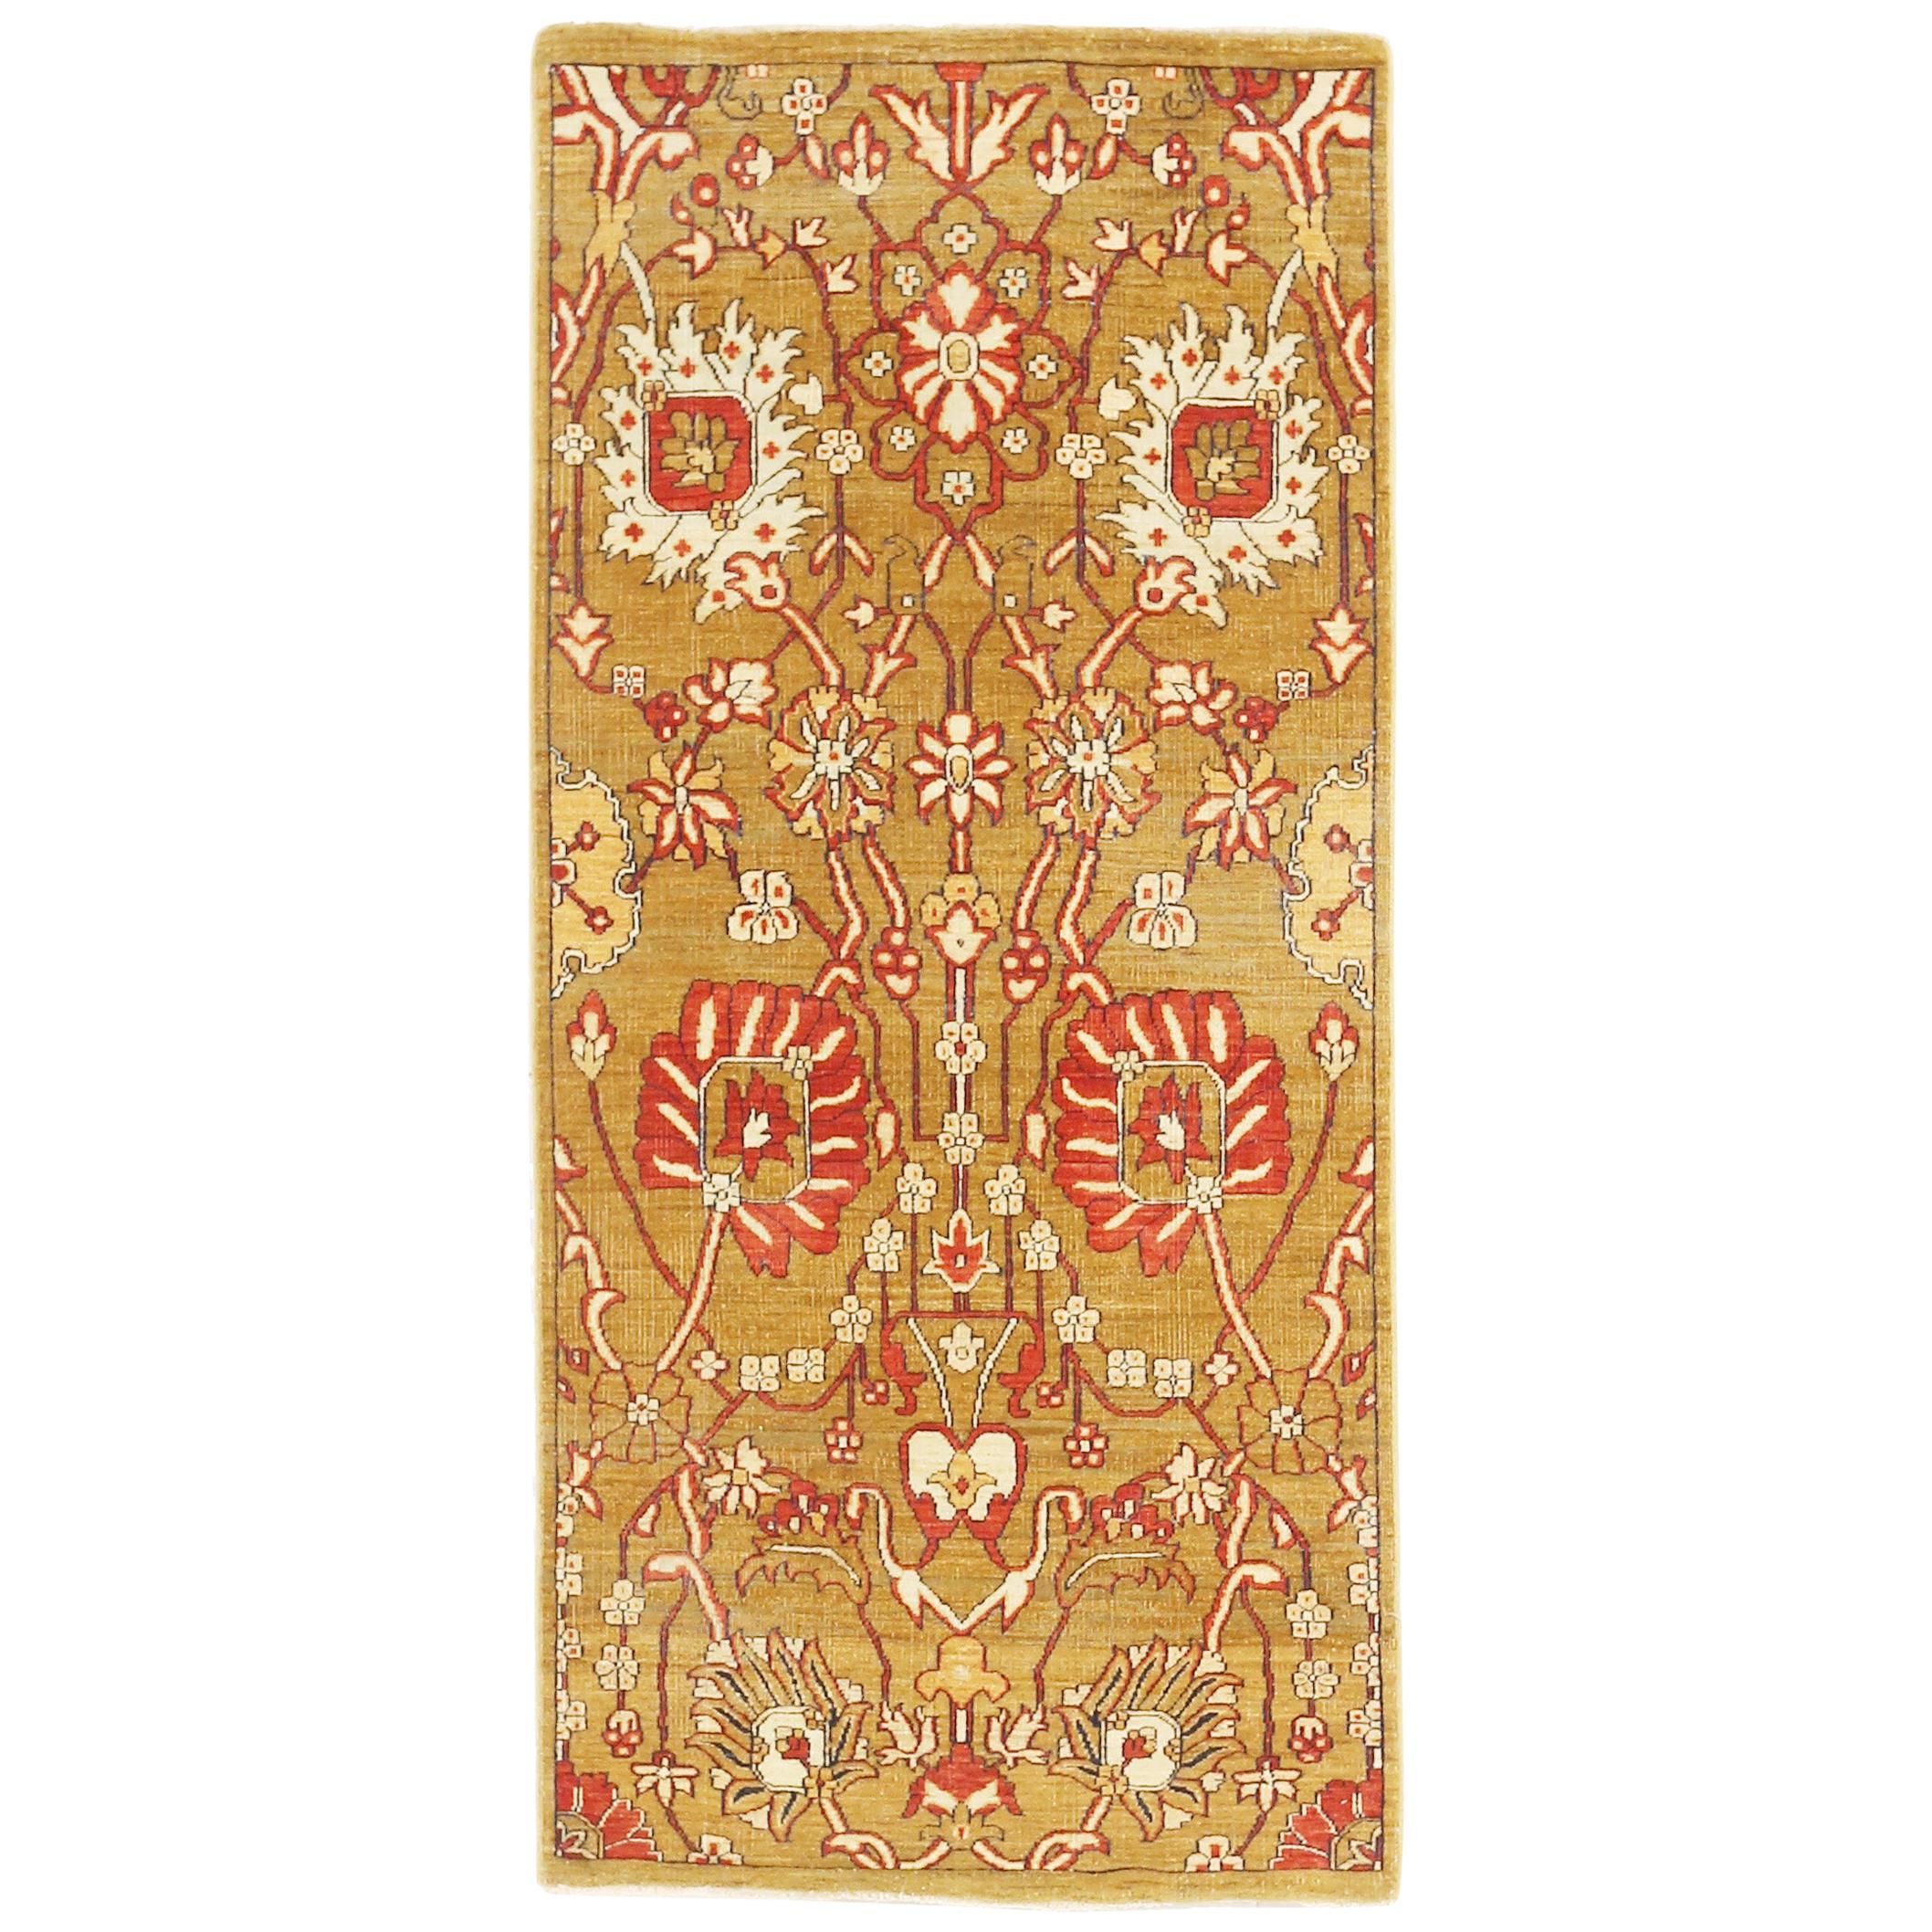 Antique Turkish Tabriz Rug with Red and White Floral Motifs For Sale